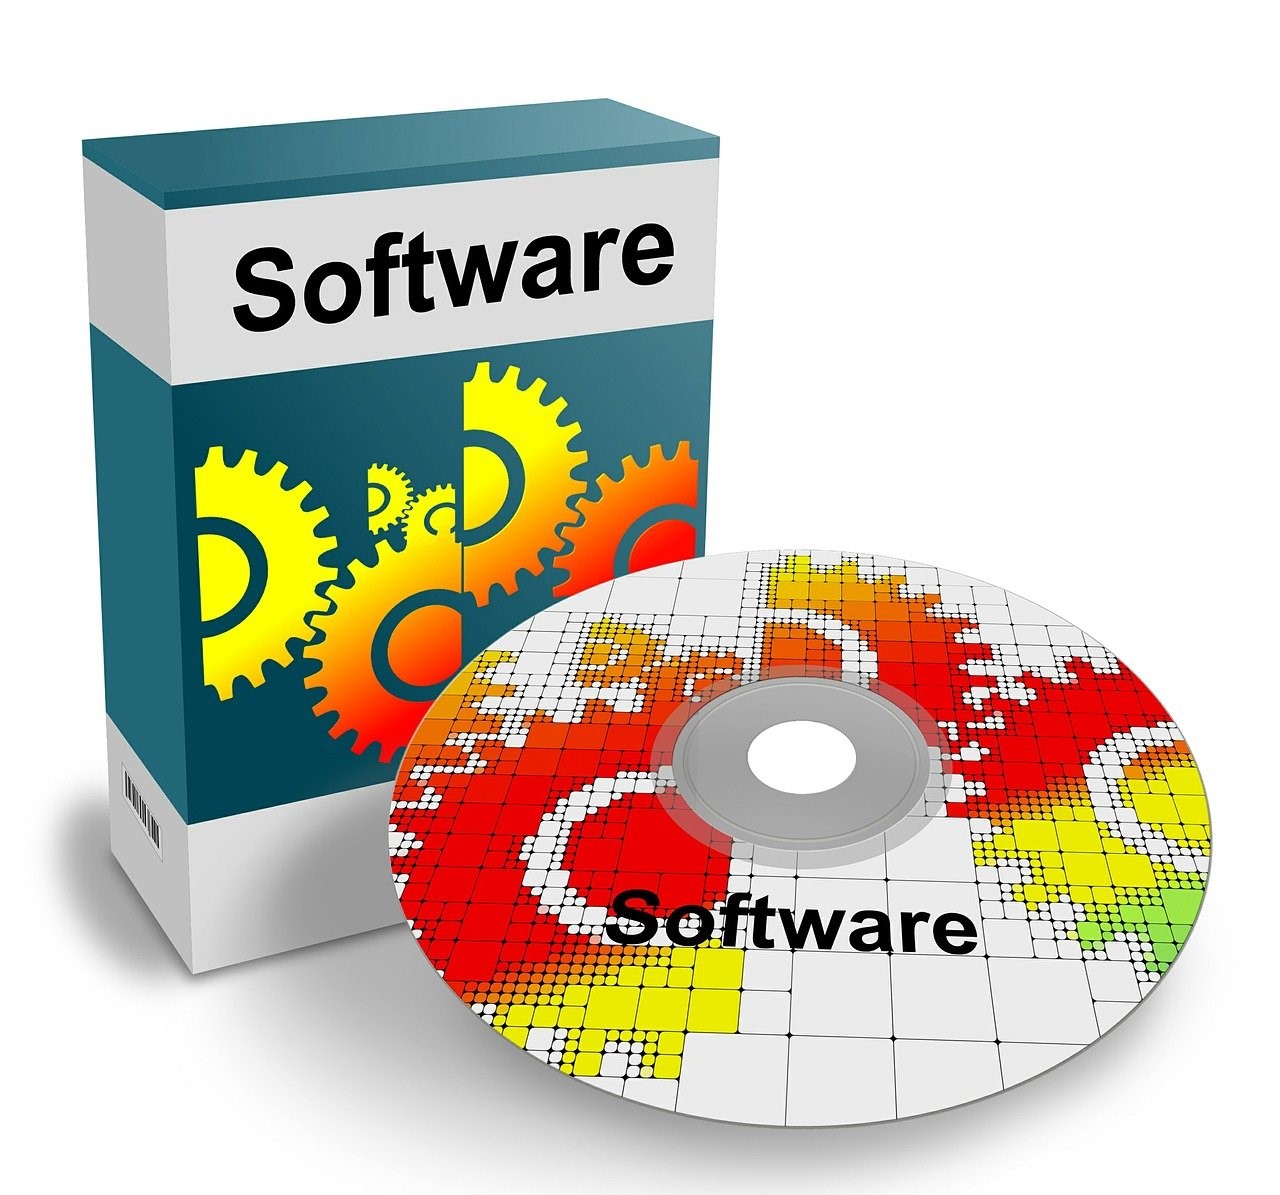 Top 10 Best Software Courses in the USA